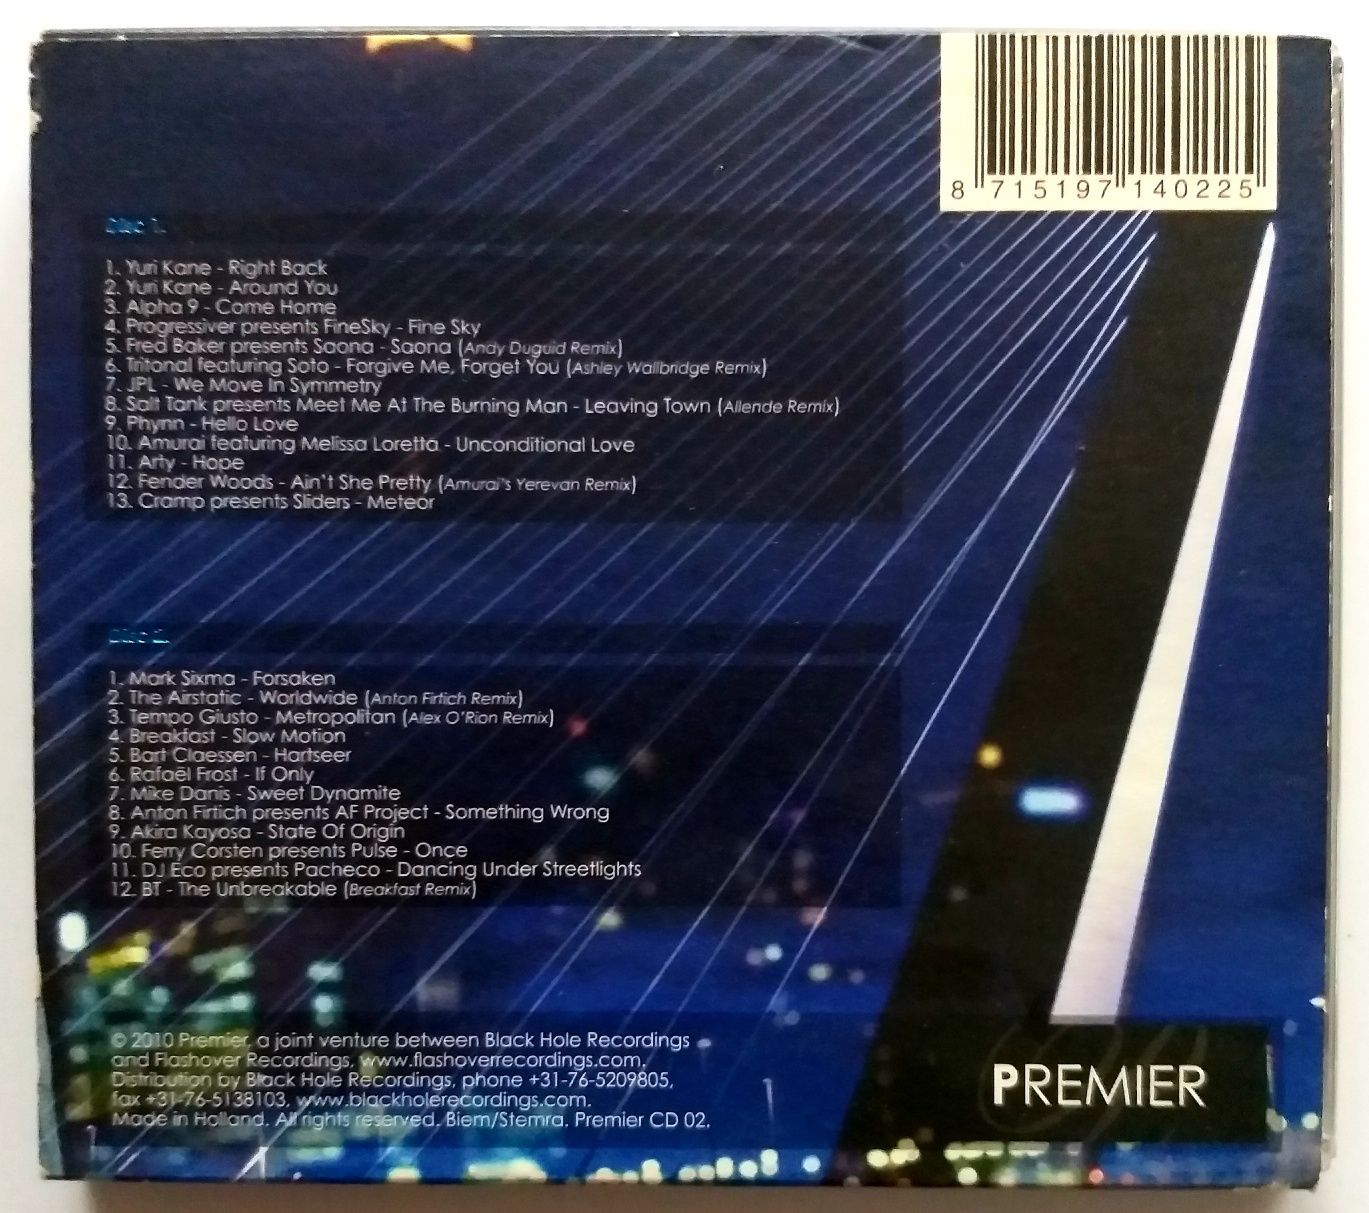 Ferry Corsten Once Upon A Night 2CD 2010r